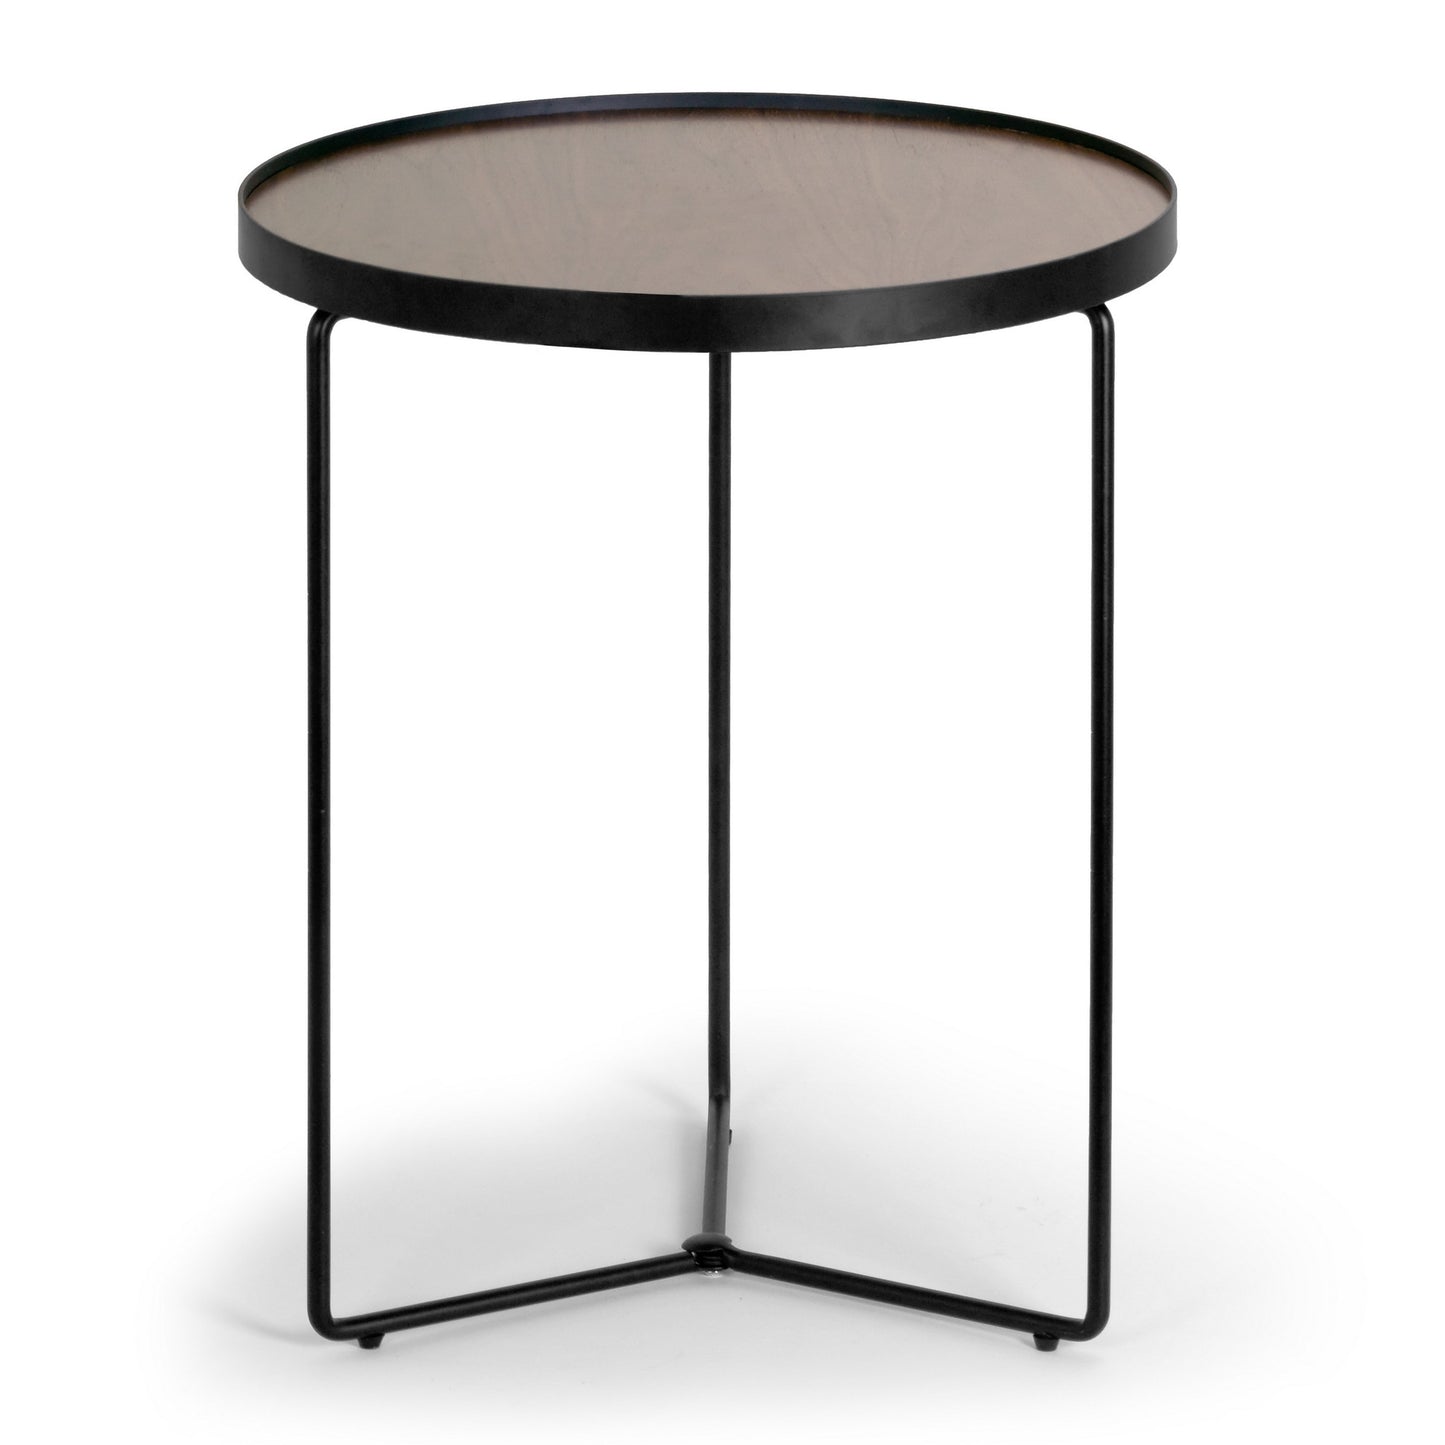 Ailsa Walnut Brown Round Rimmed Wooden Side Table with Black Metal Frame